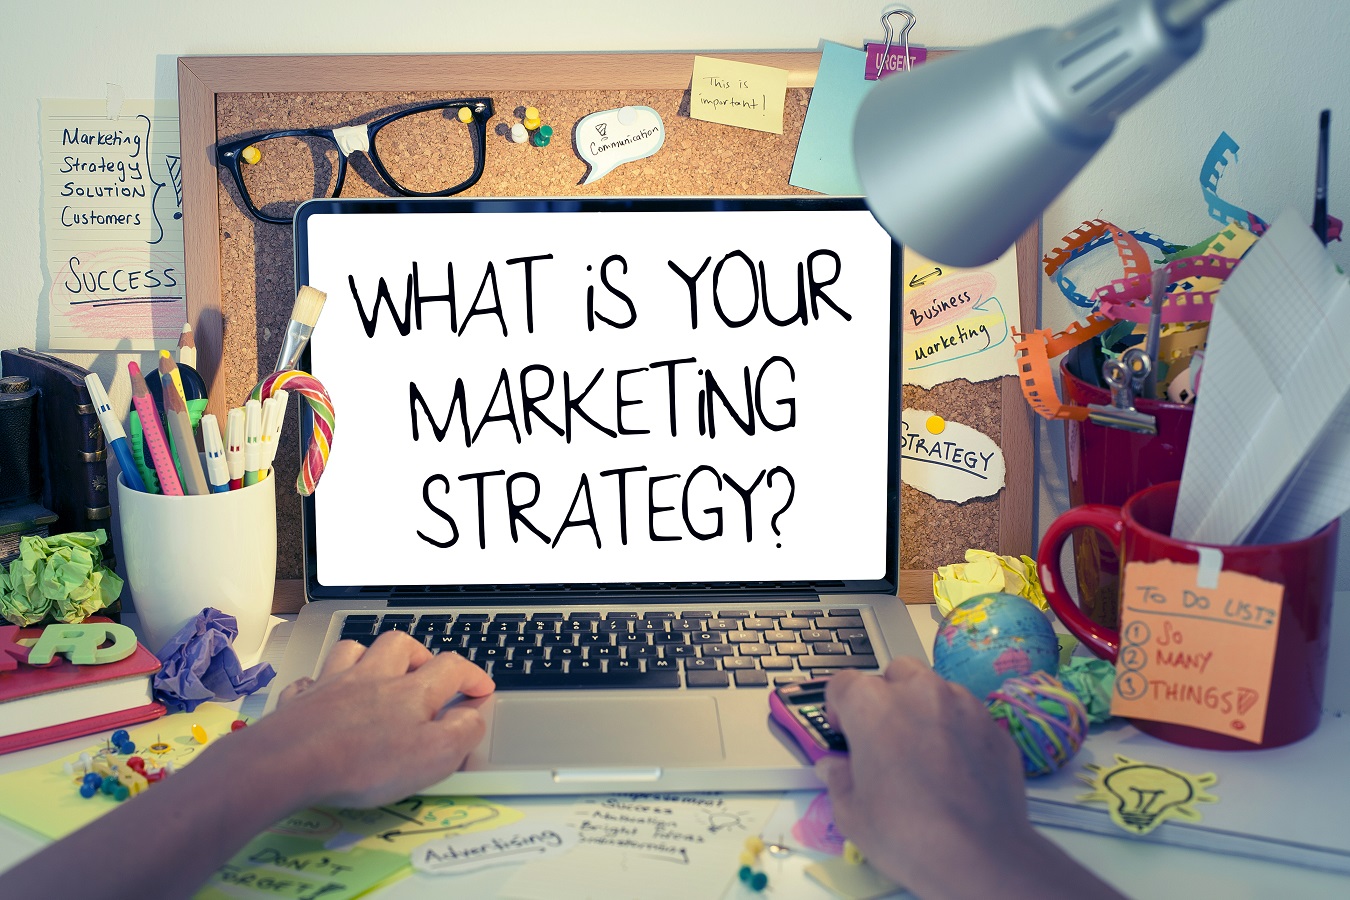 How to Get the Results You Want through Your Digital Marketing Plan?